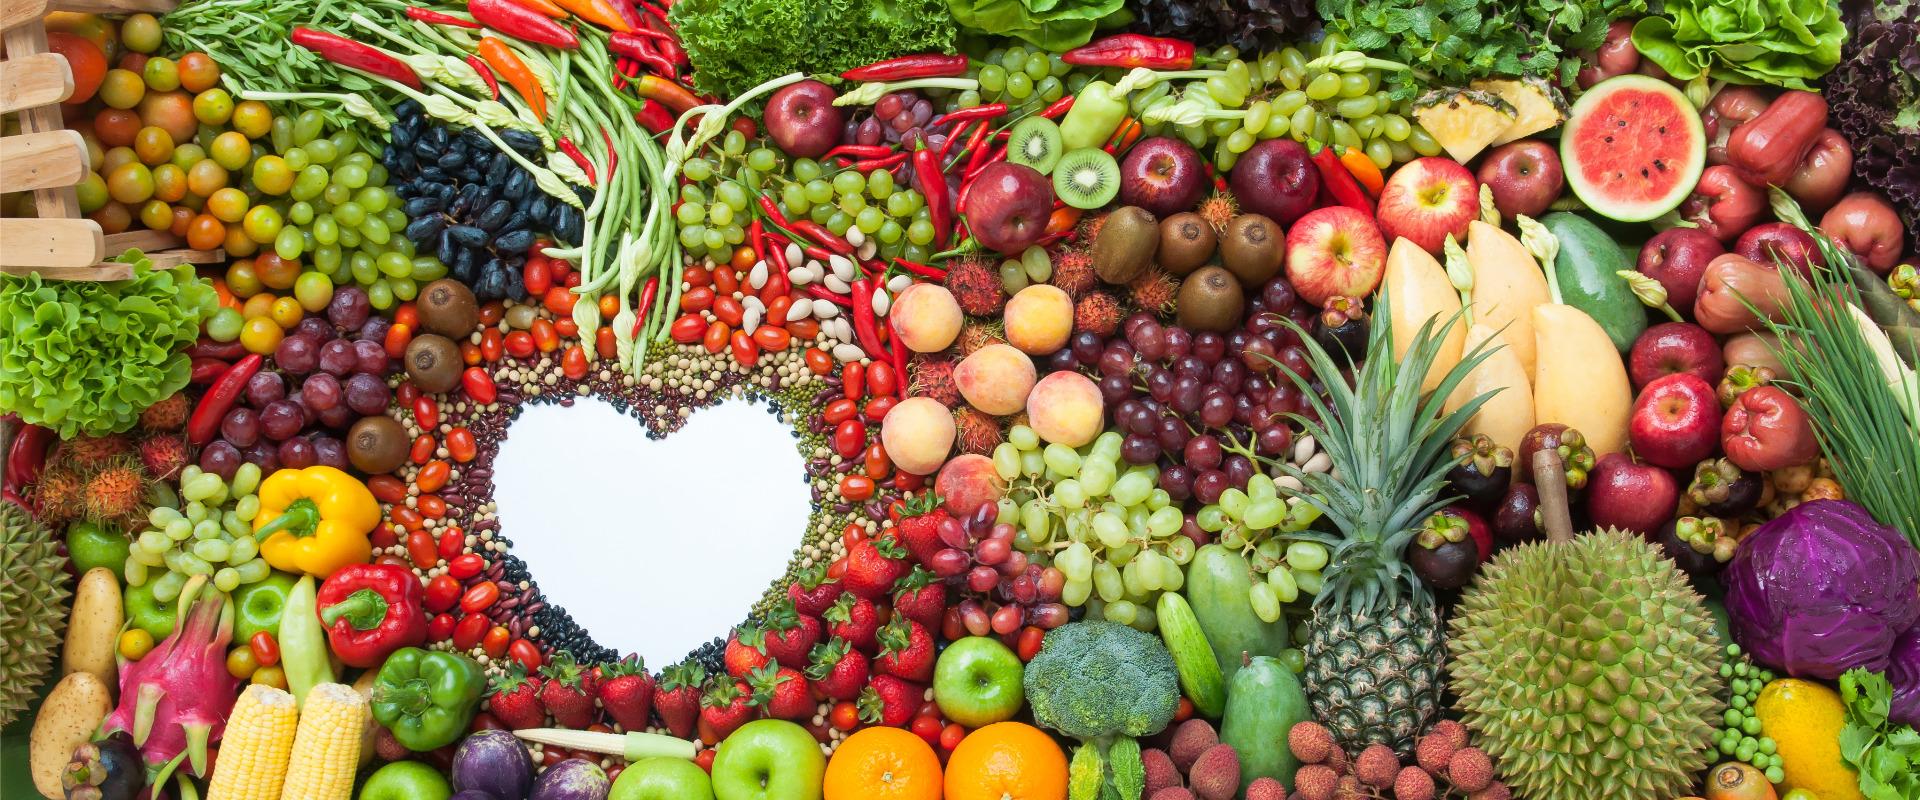 fruits veggies and nuts surrounding white space in shape of heart